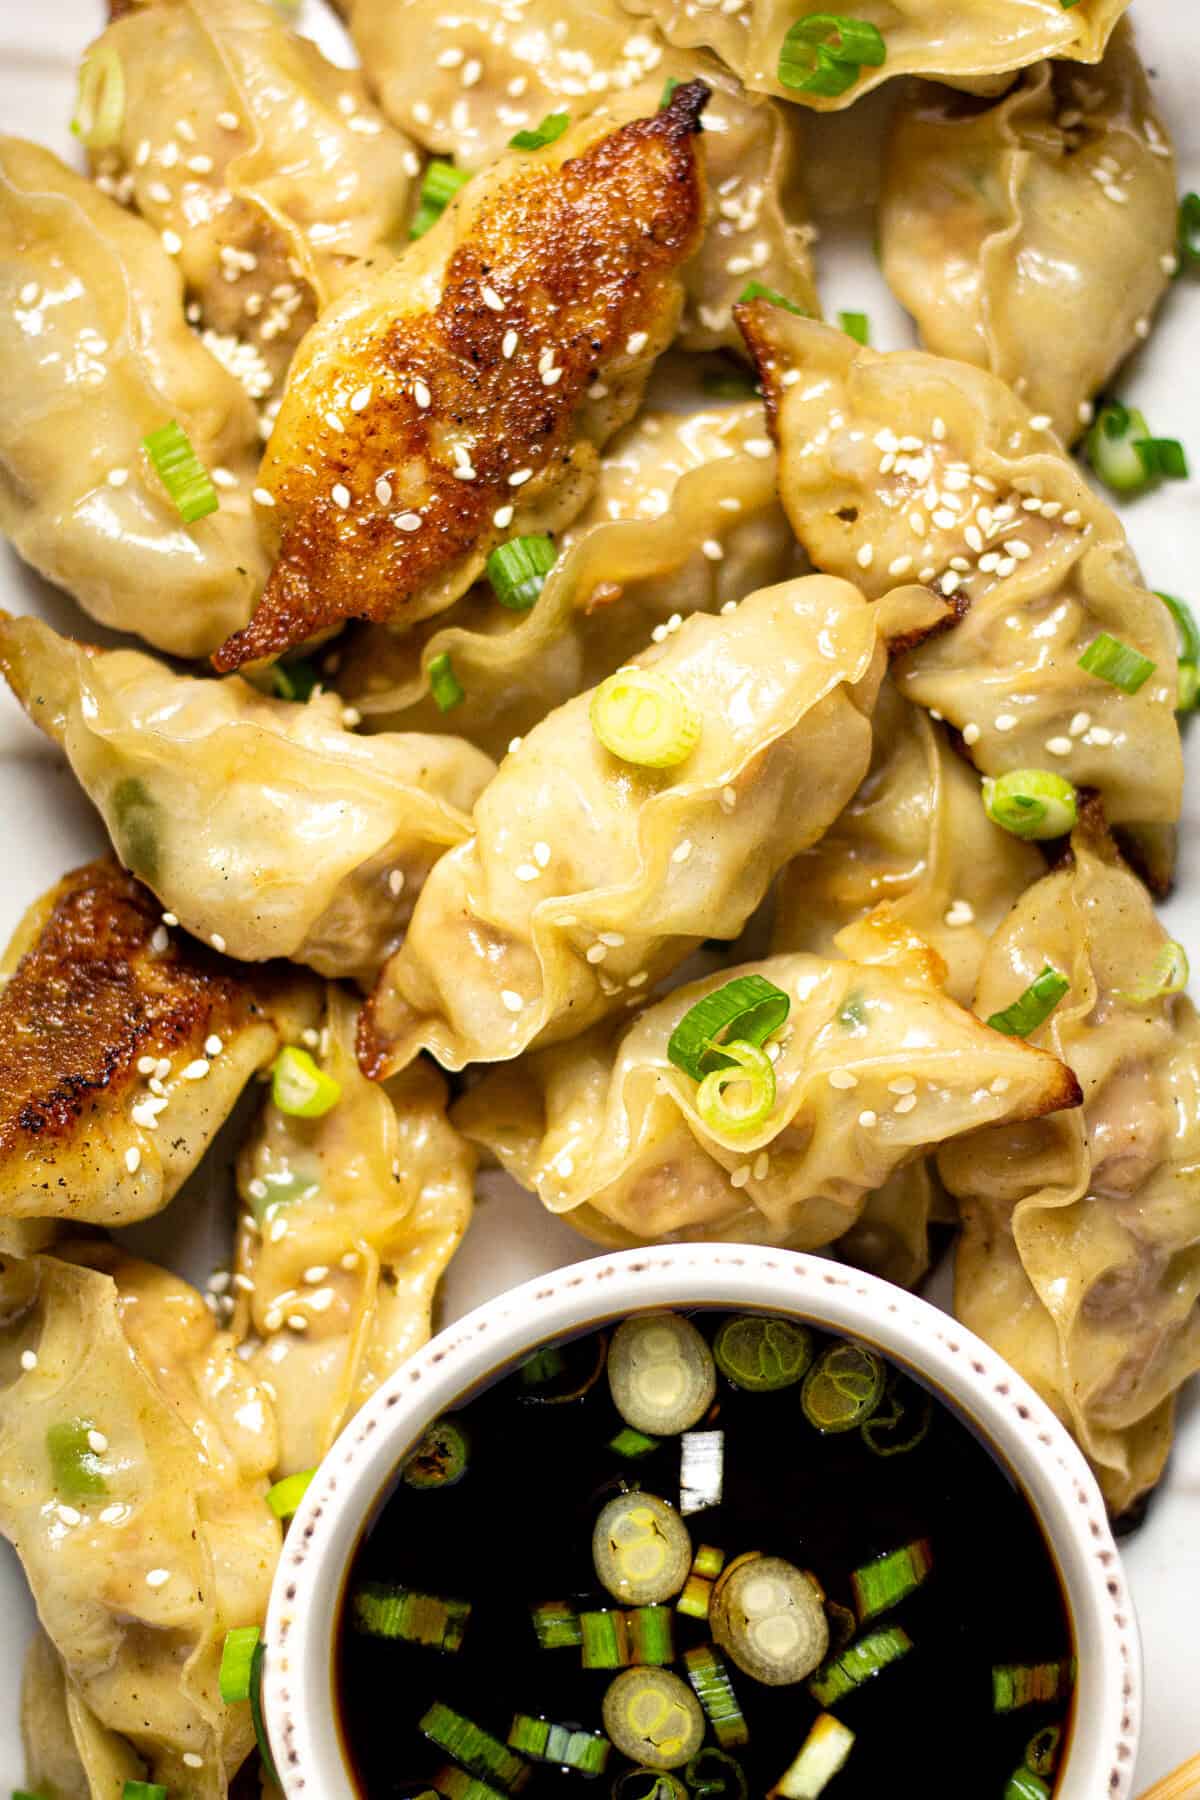 Overhead shot of a platter filled with pork dumplings garnished with green onions and sesame seeds